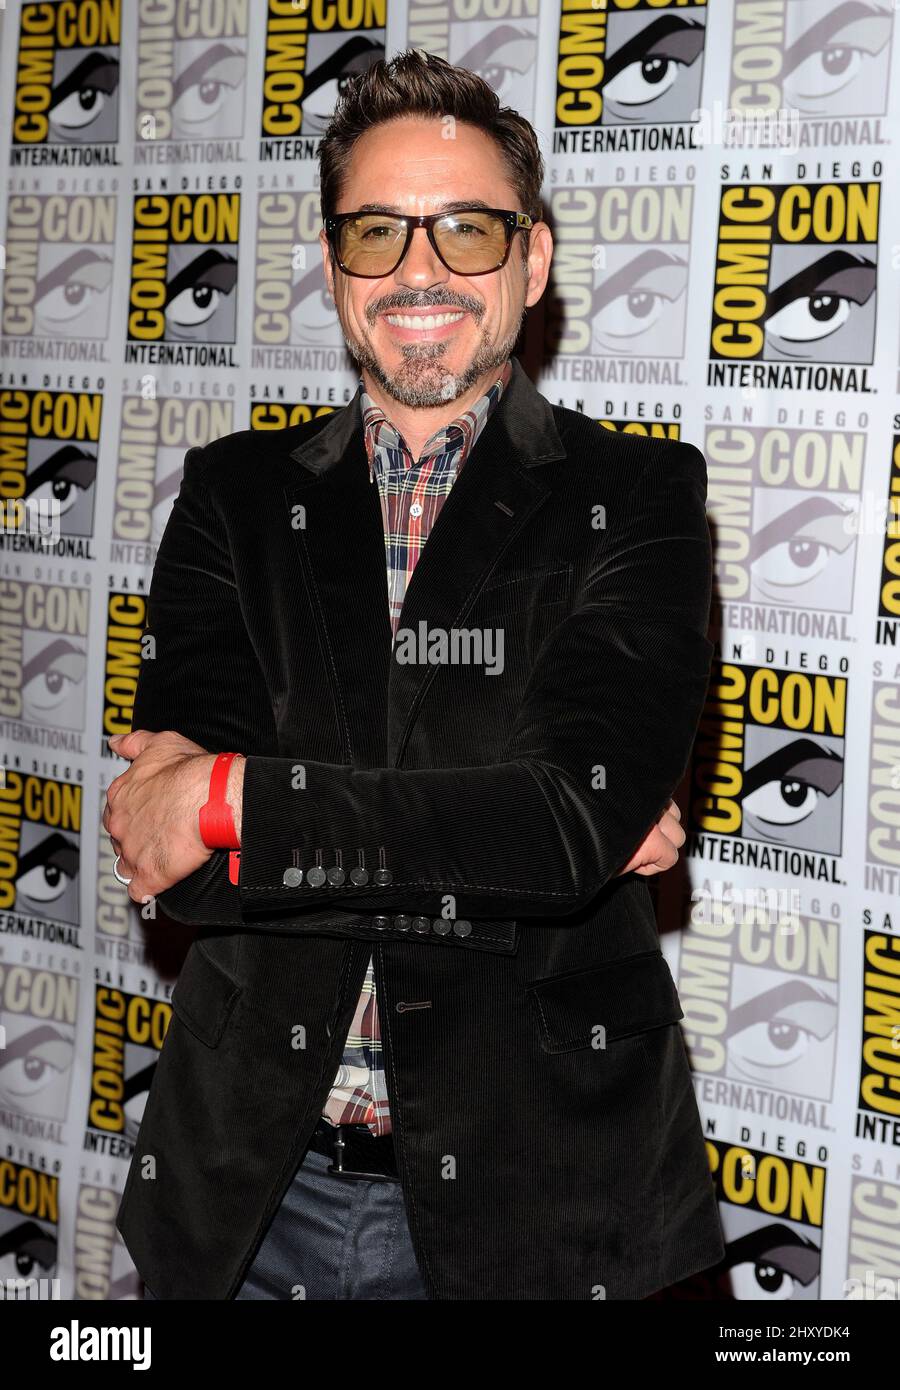 Robert Downey Jr. 2012 Comic Con - Day 3 'Iron Man 3' Photo Op held at the Bayfront Hilton Stock Photo